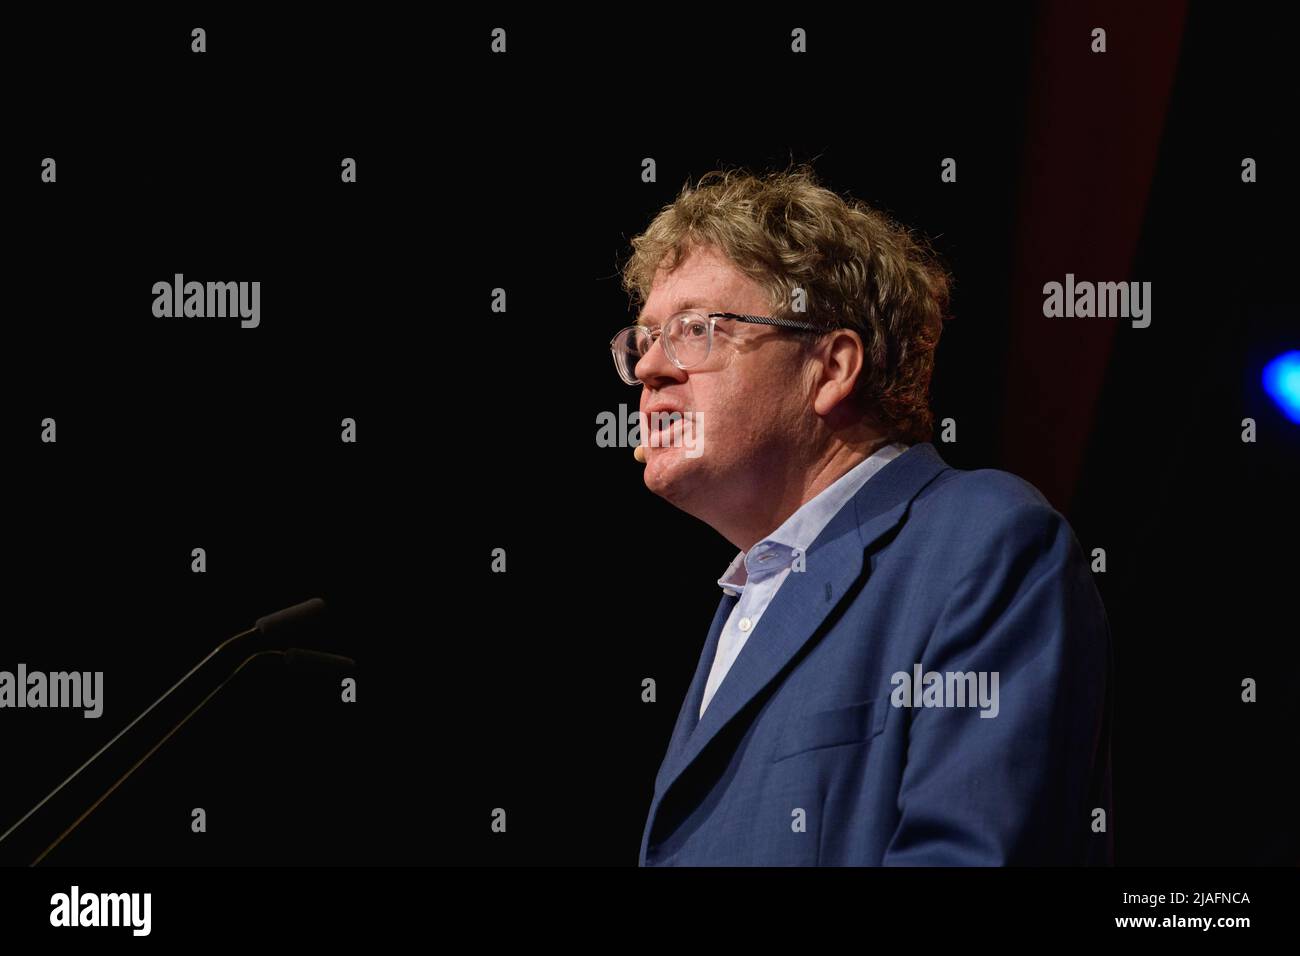 Hay-on-Wye, Wales, UK. 30th May, 2022. James Runcie with Irène Duval at Hay Festival 2022, Wales. Credit: Sam Hardwick/Alamy. Stock Photo